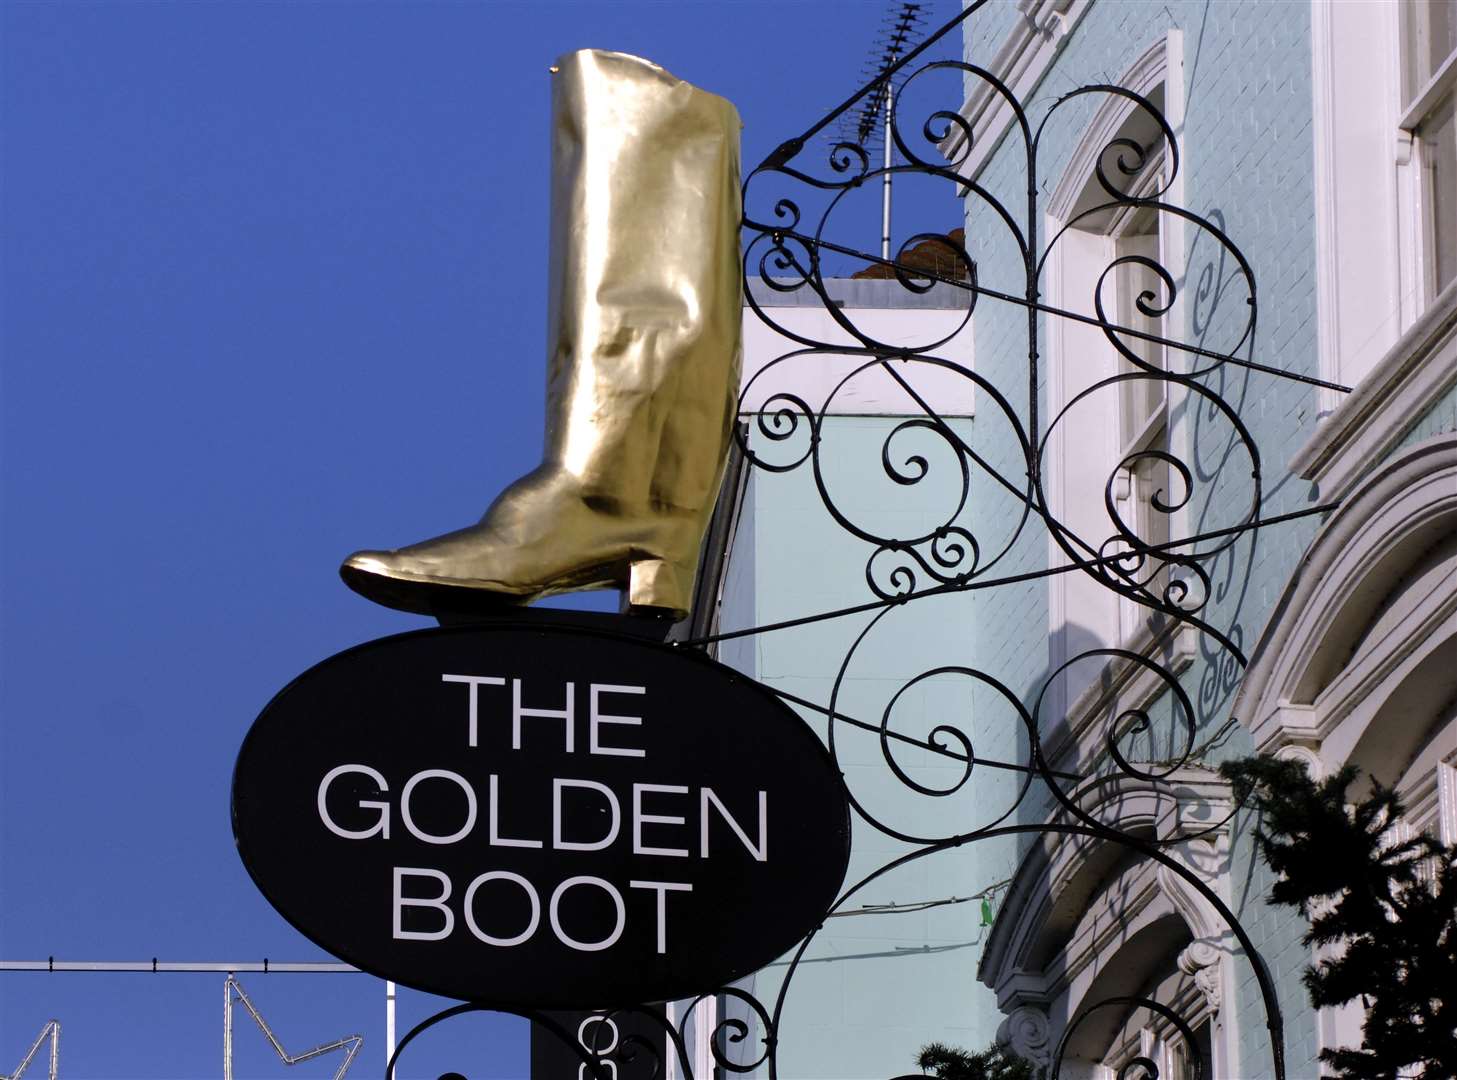 The iconic Golden Boot